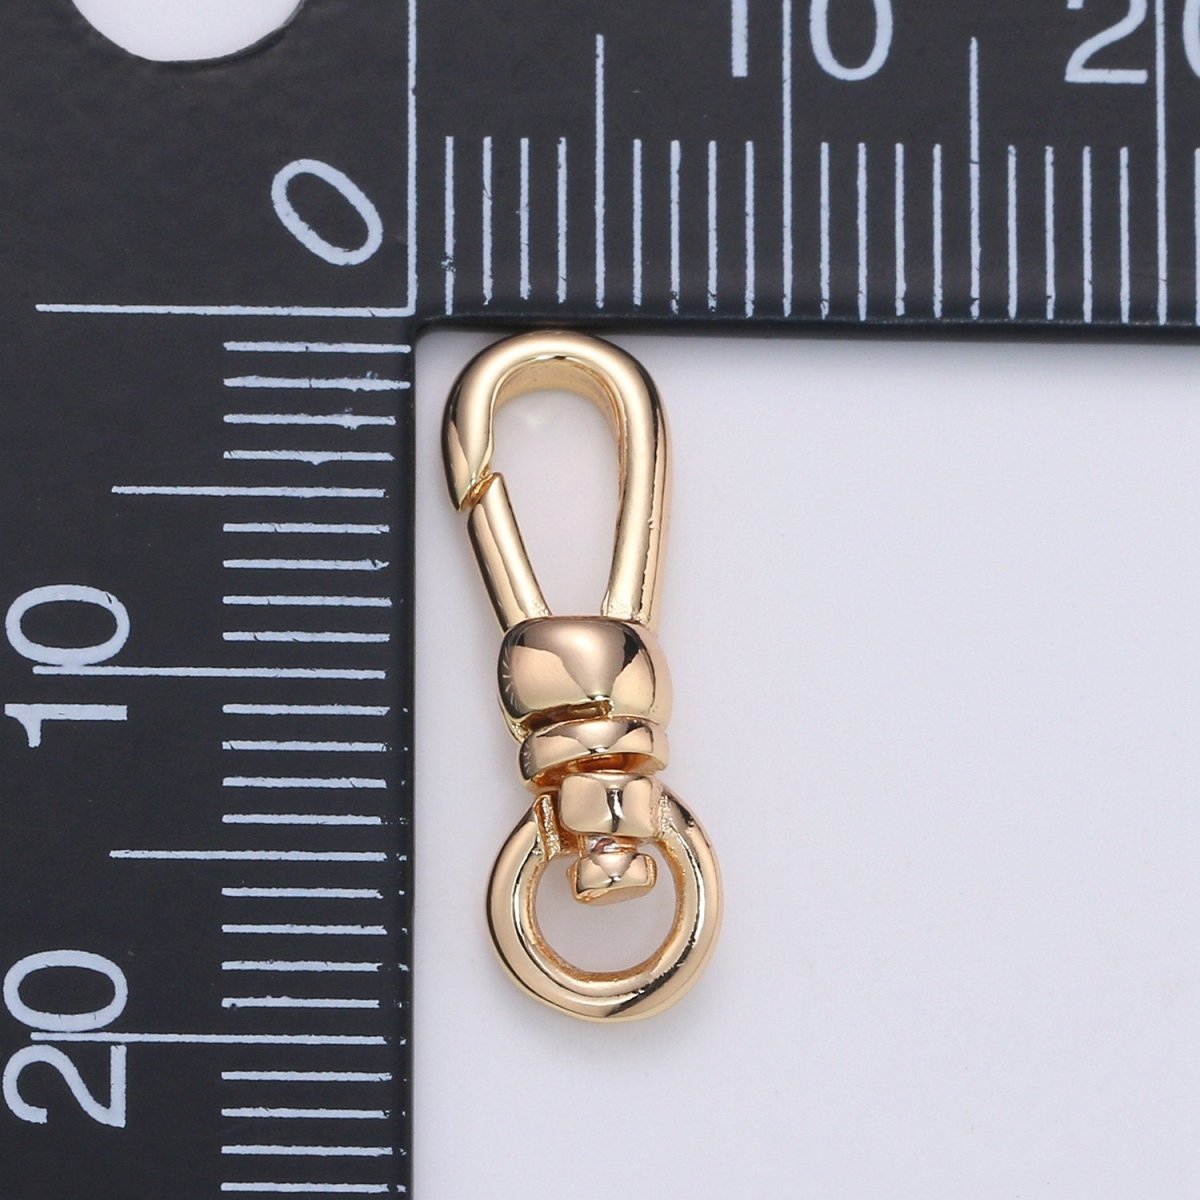 Dainty Self Closing Swivel Clasps - Triggerless - 20mm X 6mm - Real Gold Plated for Charm Lock Keychain Supply Component Supp-945 L-009 - DLUXCA